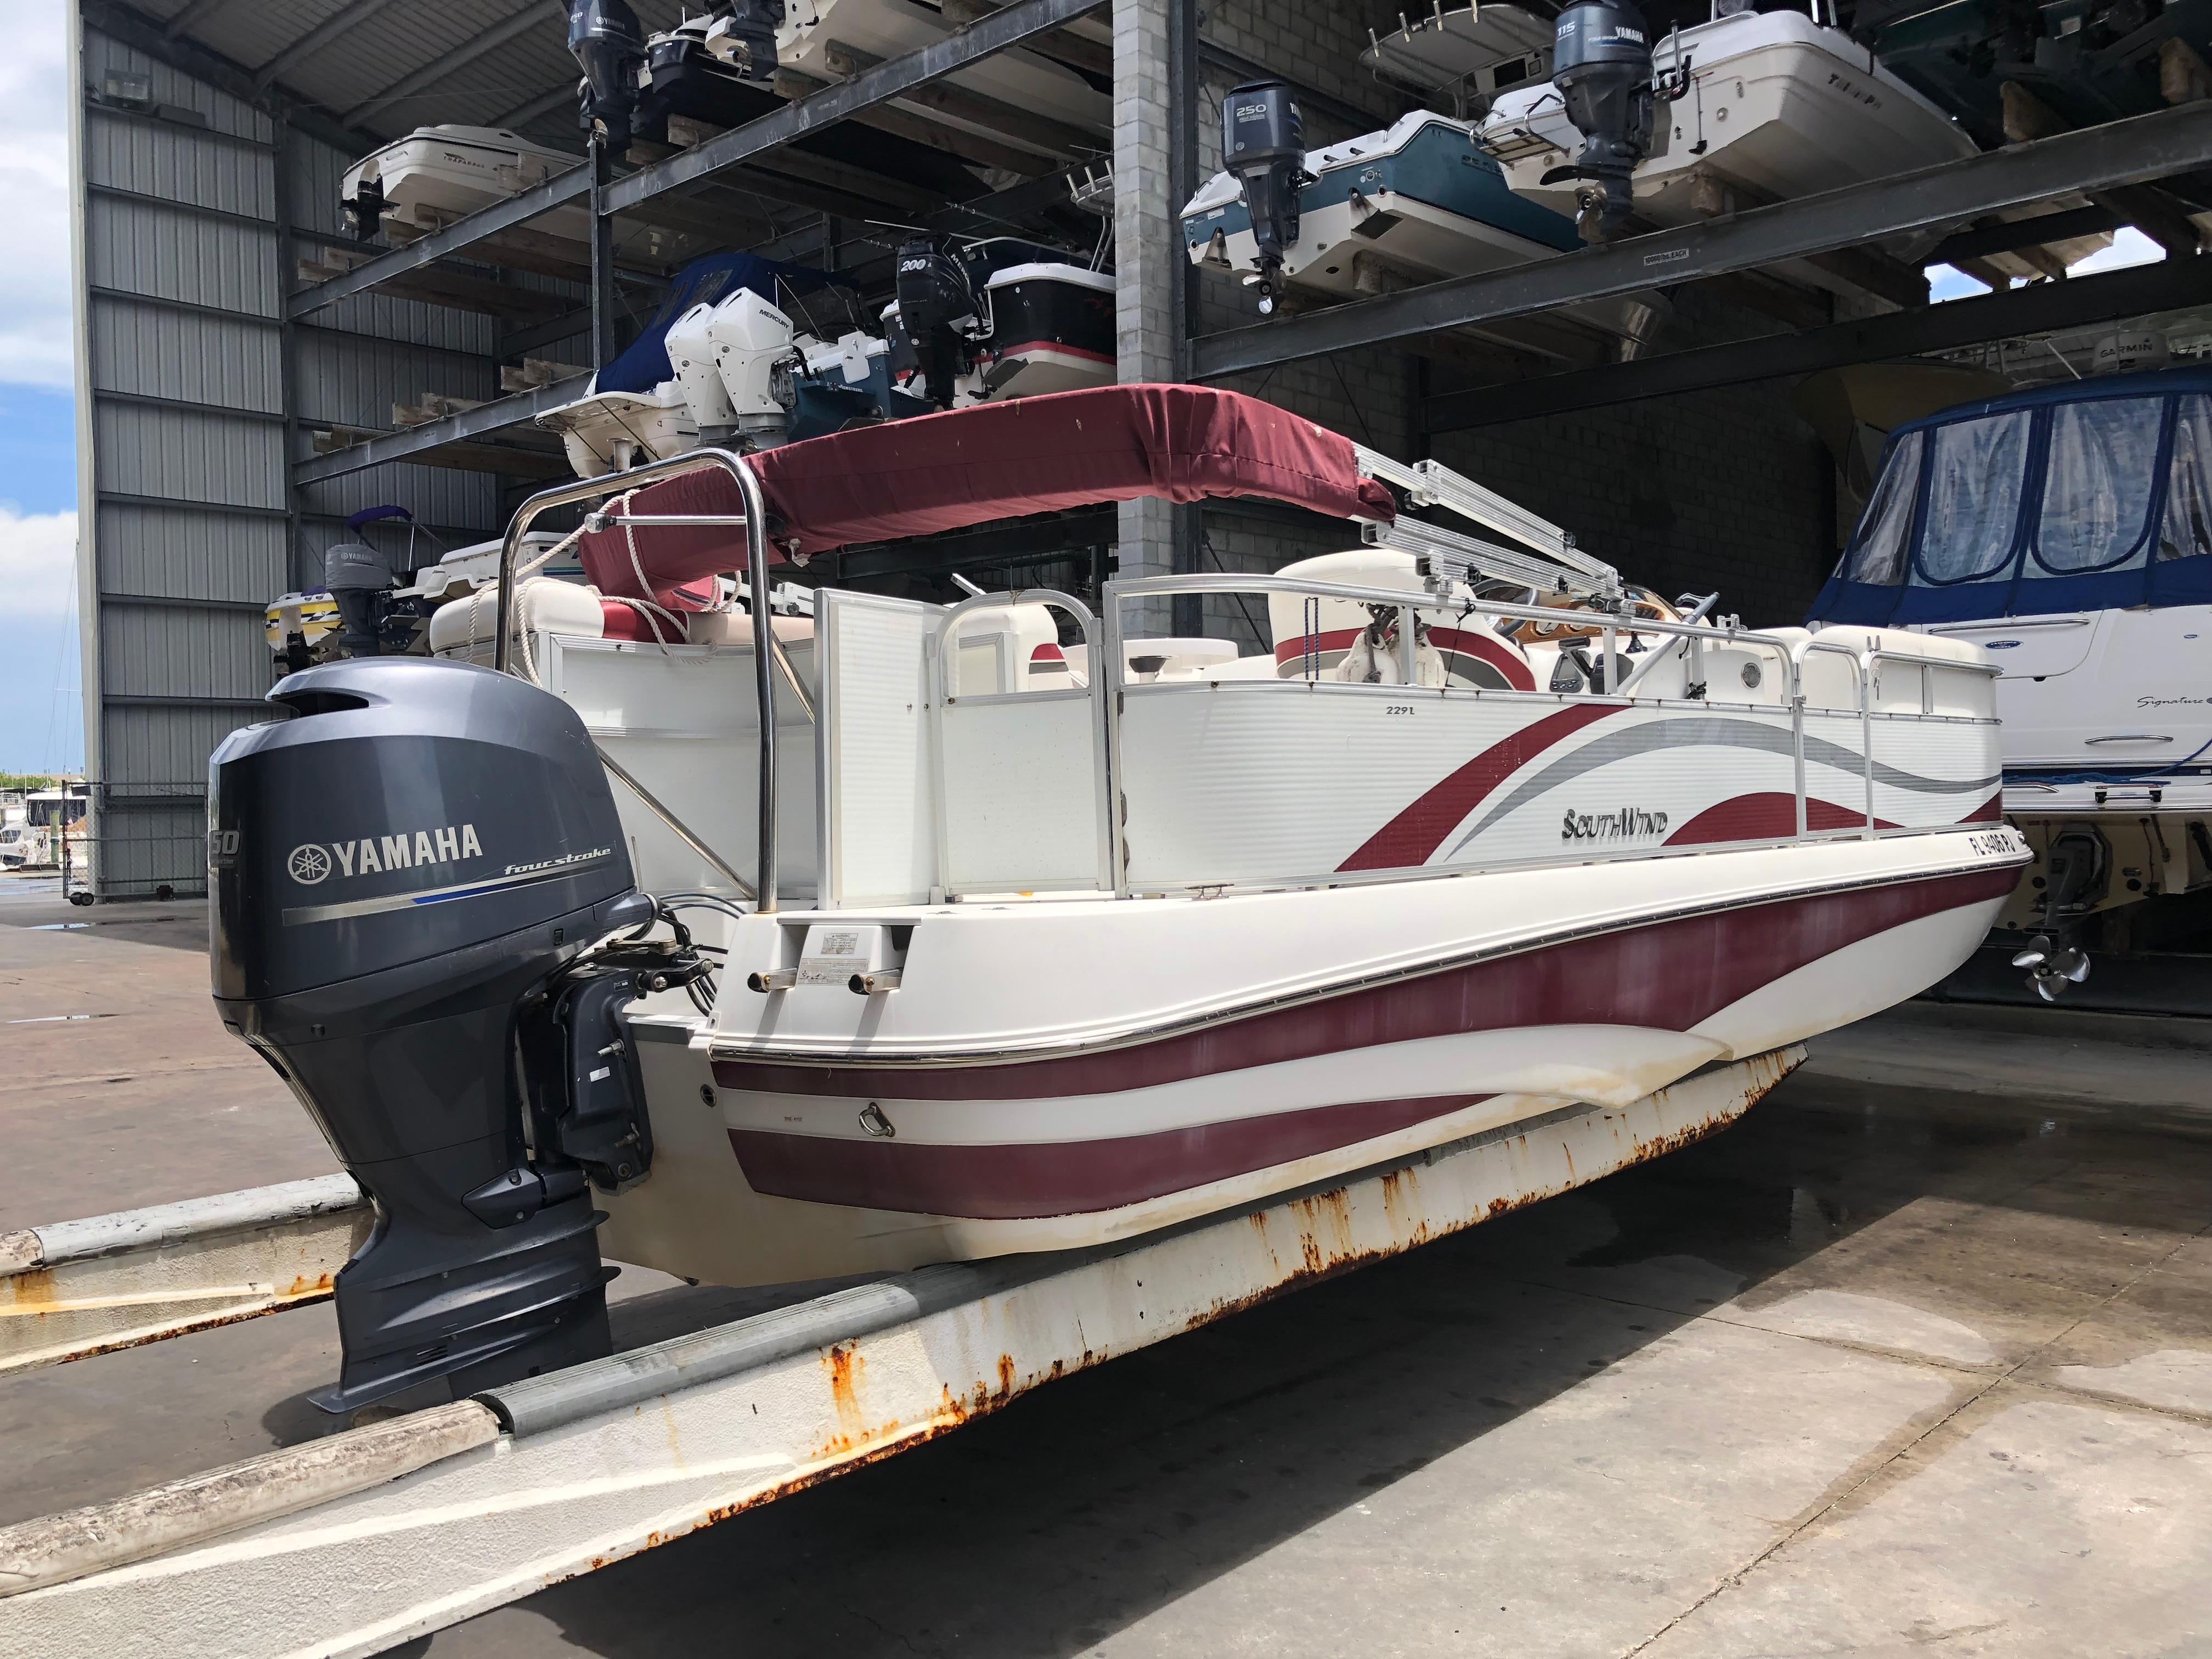 2013 SouthWind 229 LC